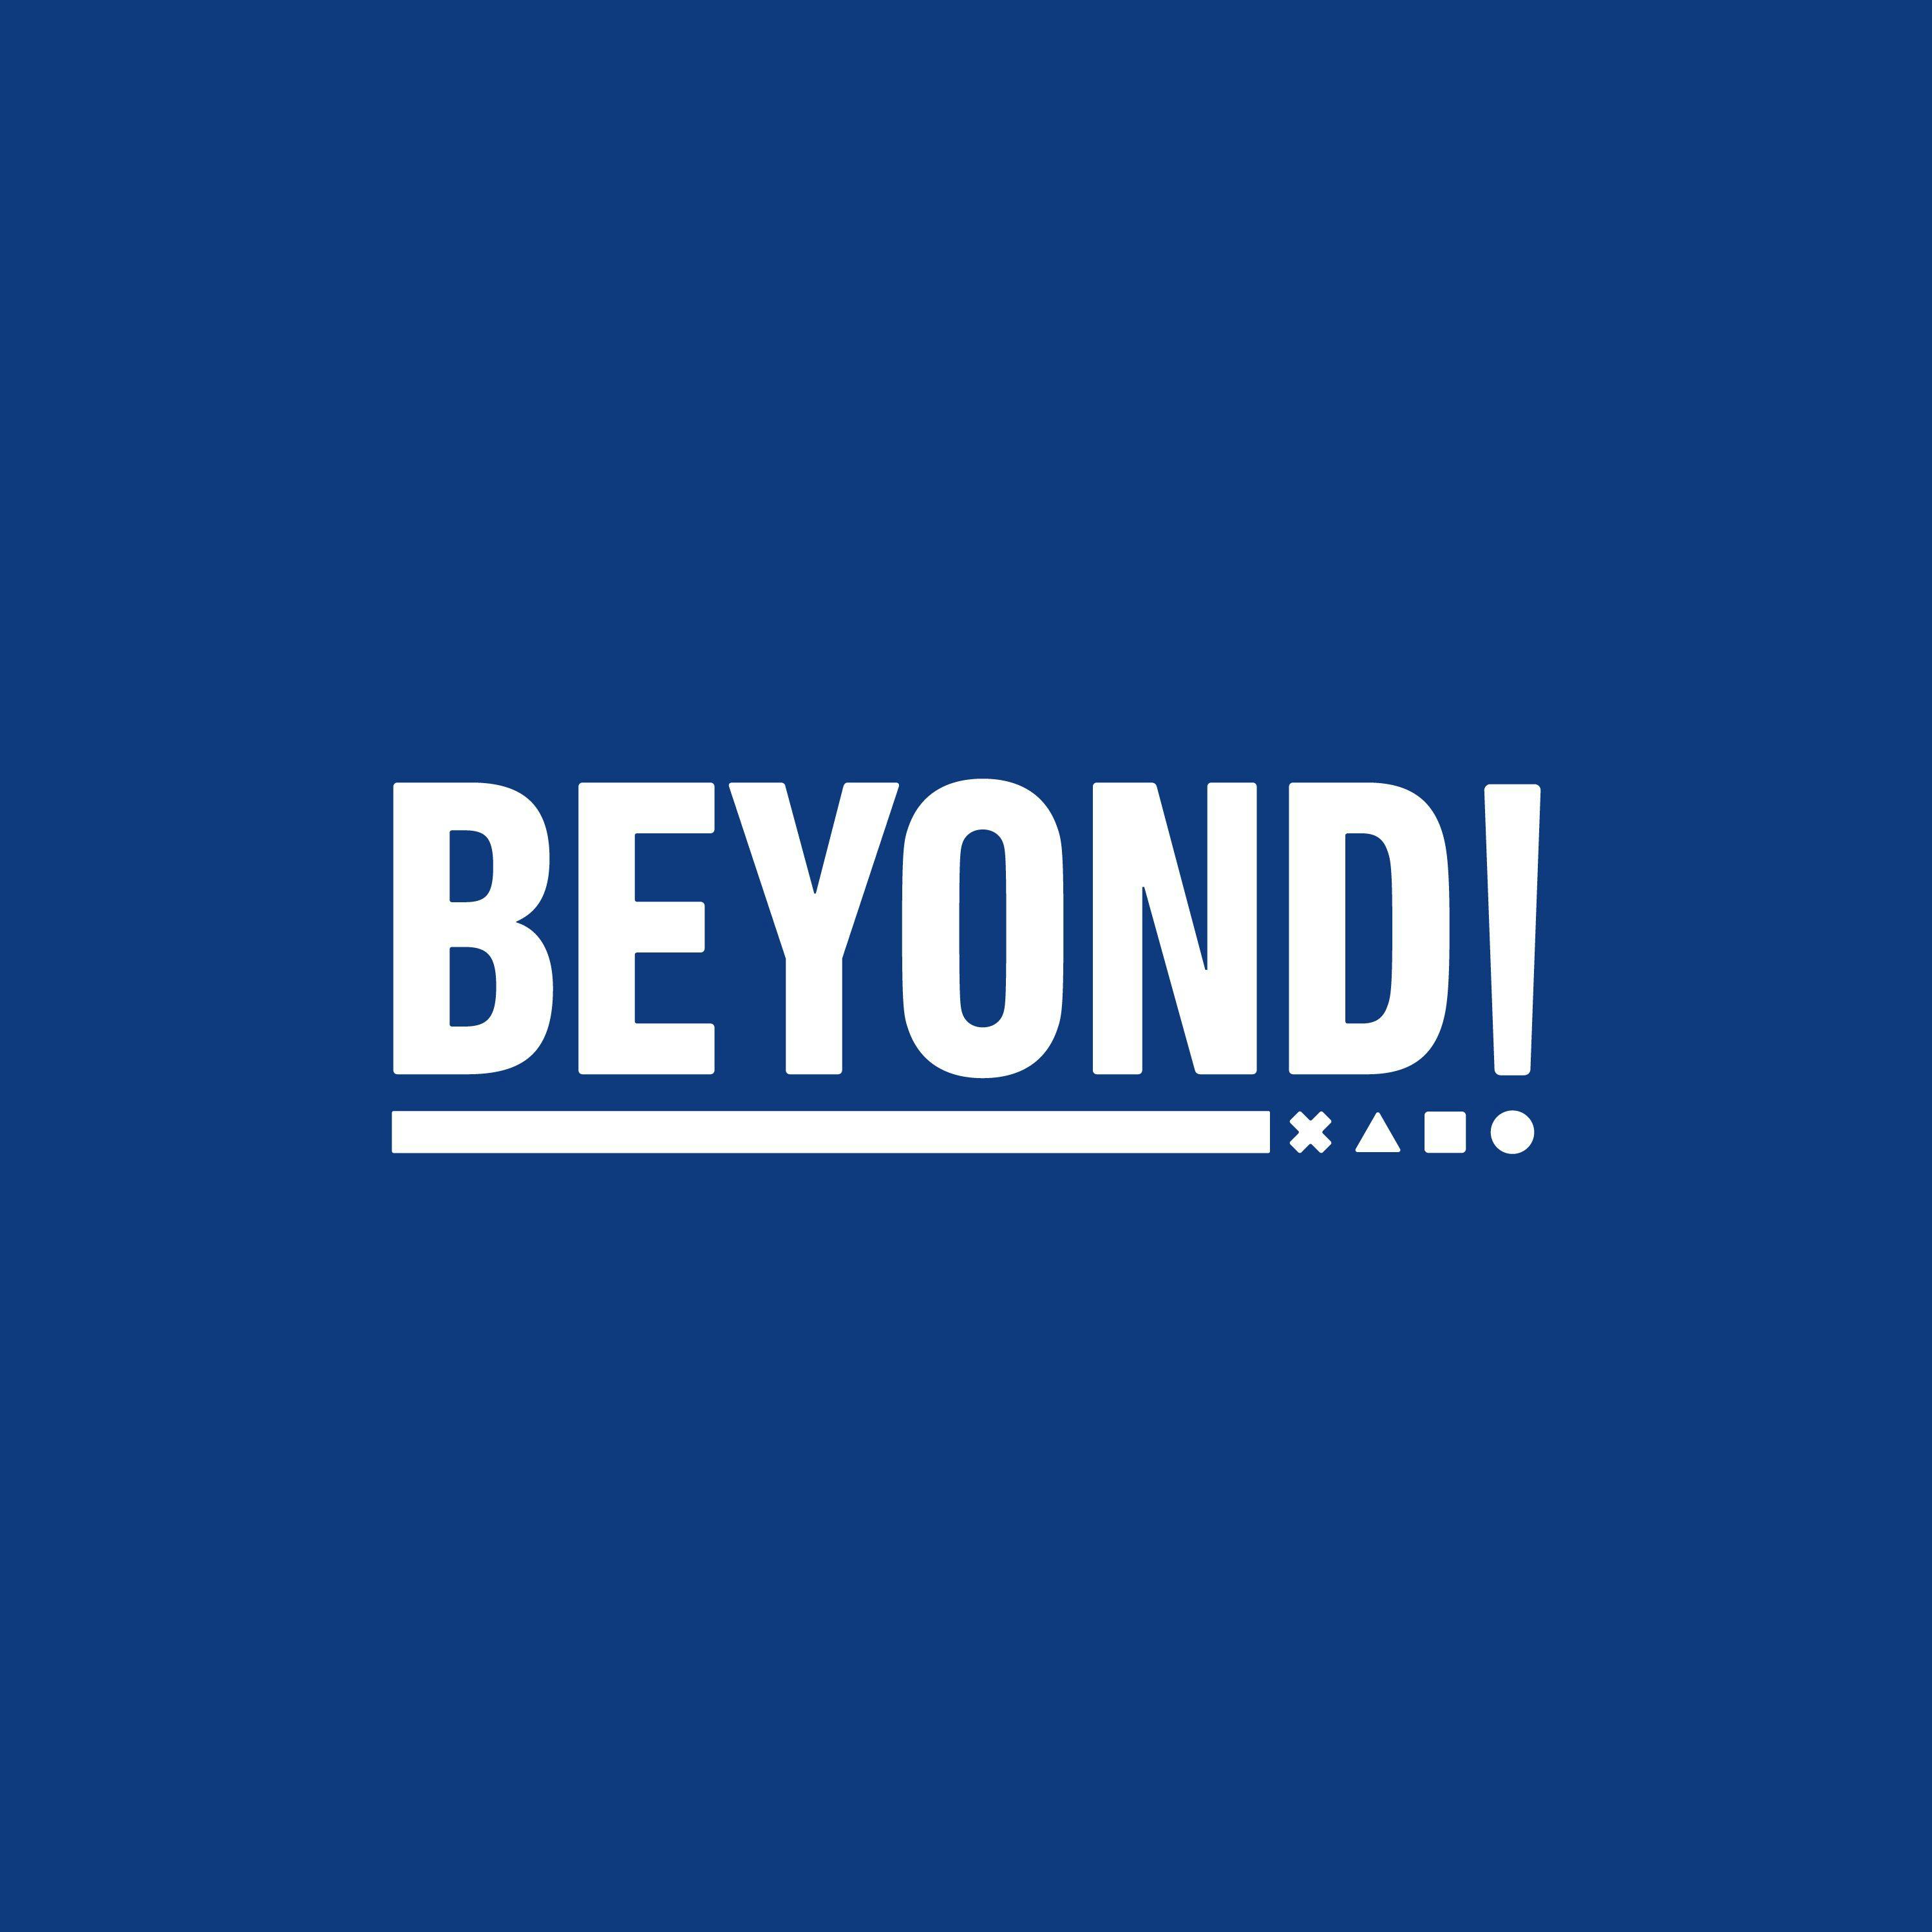 PlayStation Had a Big Gamescom (Without Its Own Showcase) - Beyond Episode 715